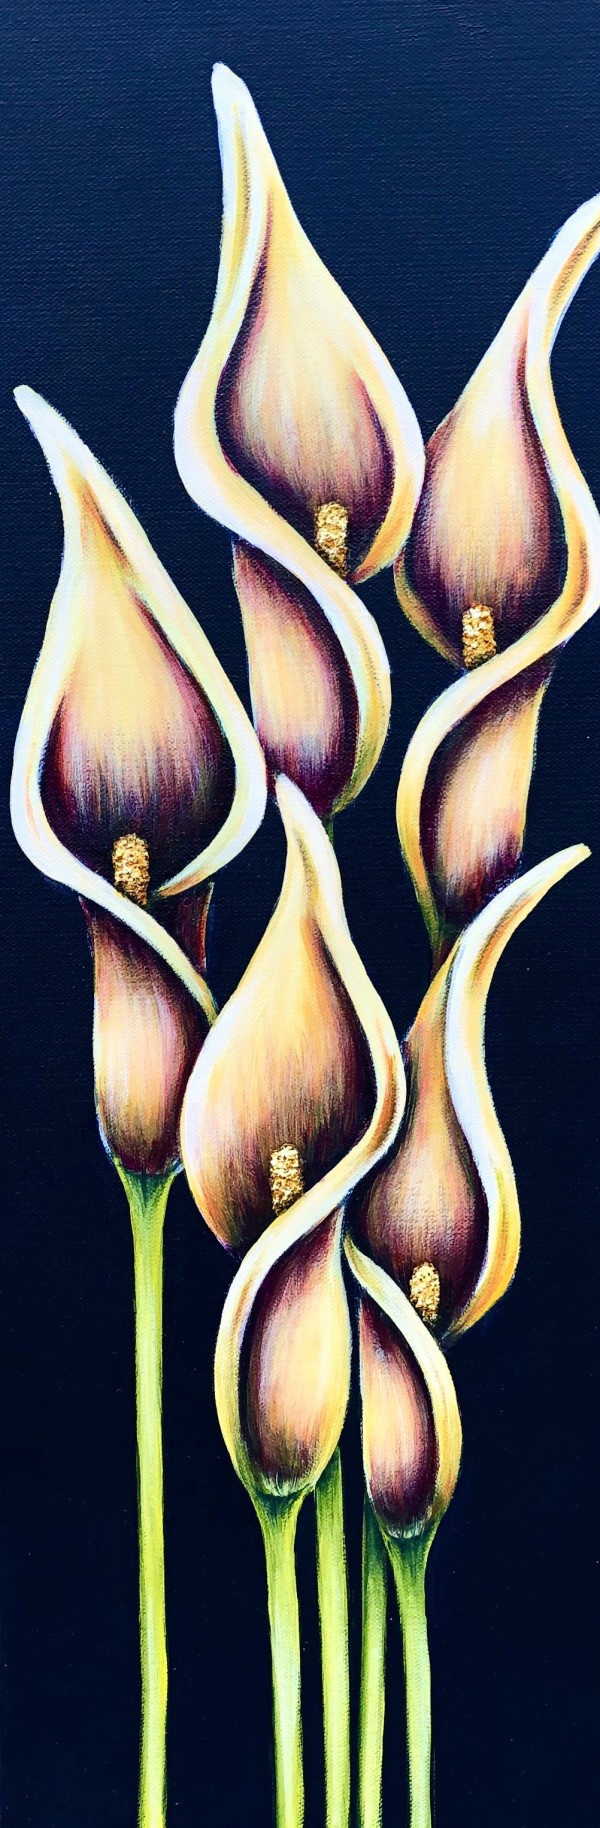 Small Works - Yellow Calla Lillies #973 by Denise Cassidy Wood